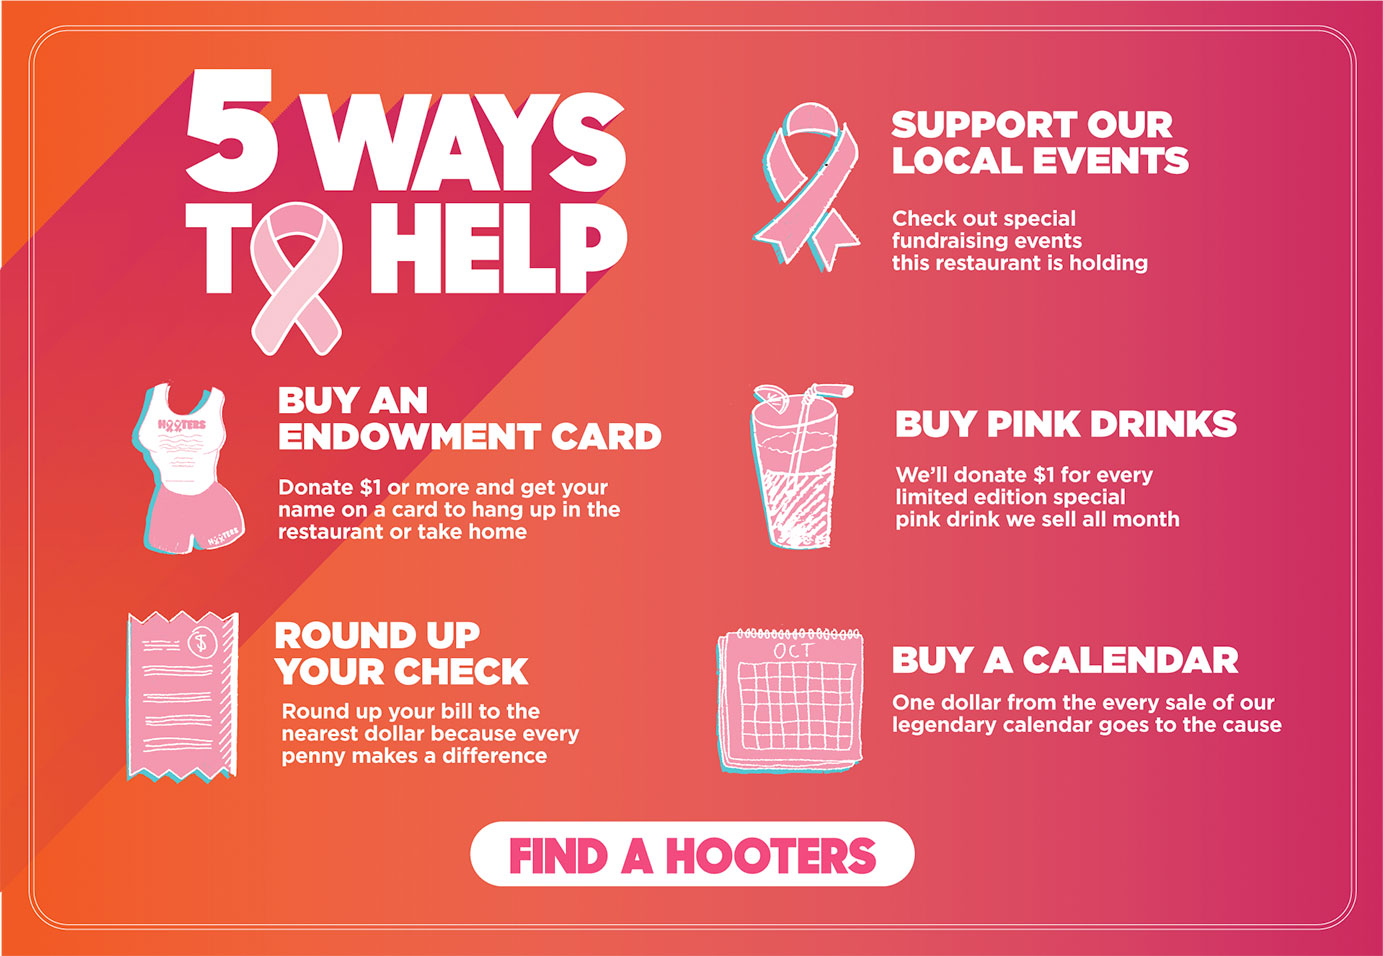 5 Ways to Help - Find a Hooters